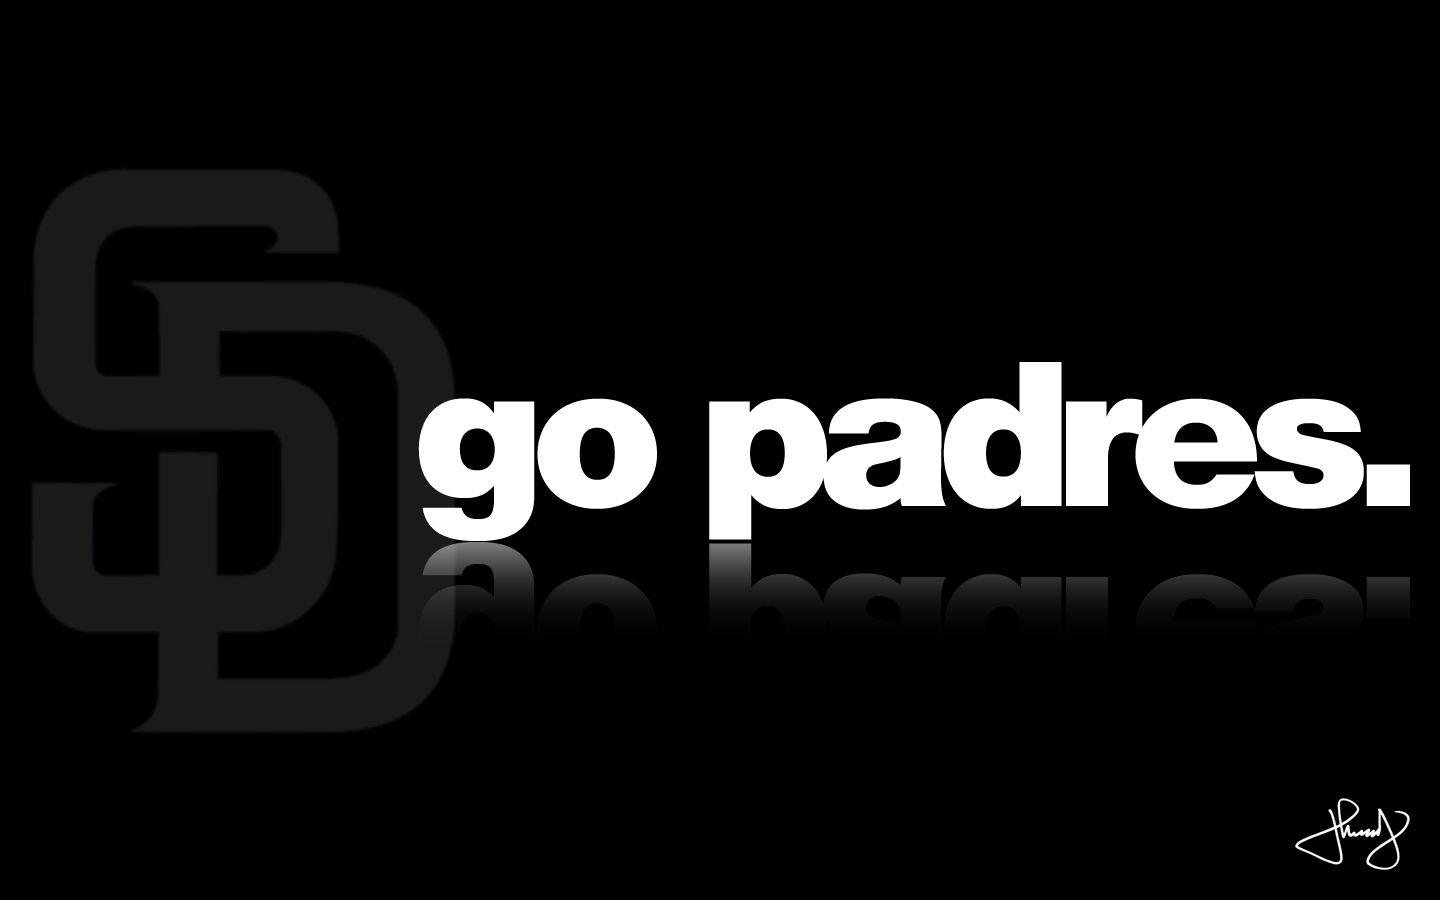 san diego padres wallpaper Image, Graphics, Comments and Picture